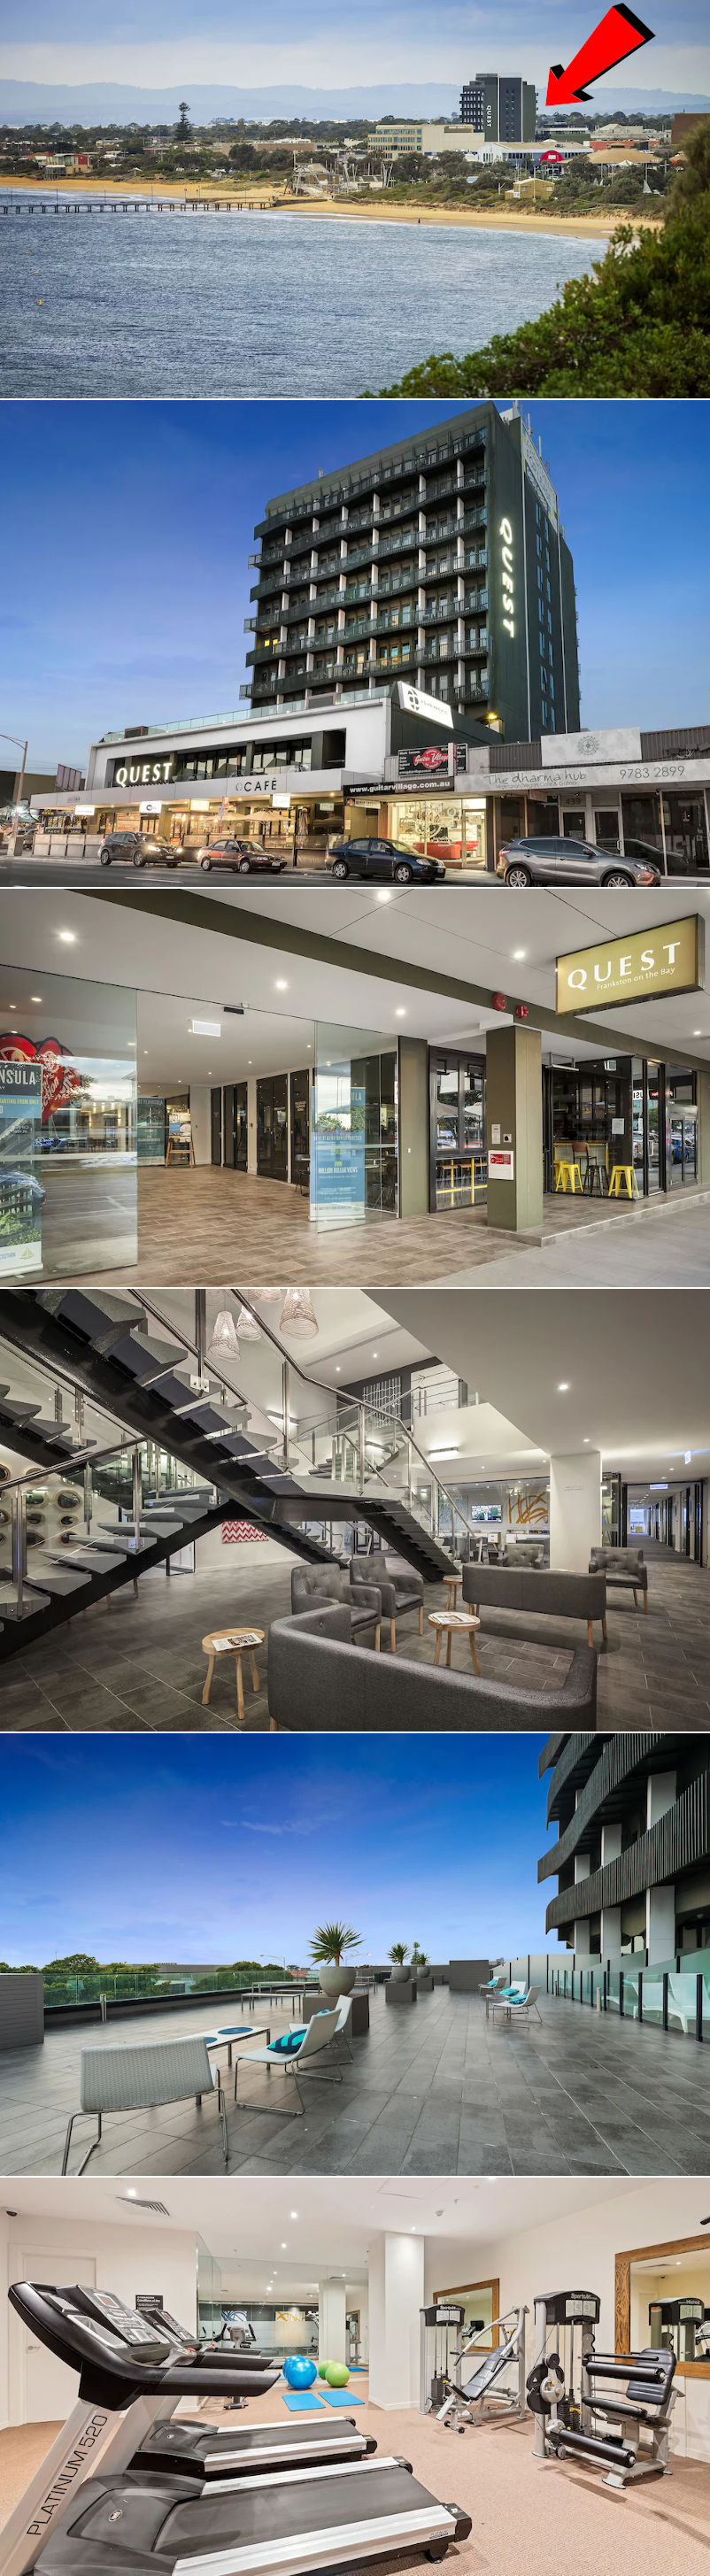 Quest Frankston on the Bay - Location and facilities